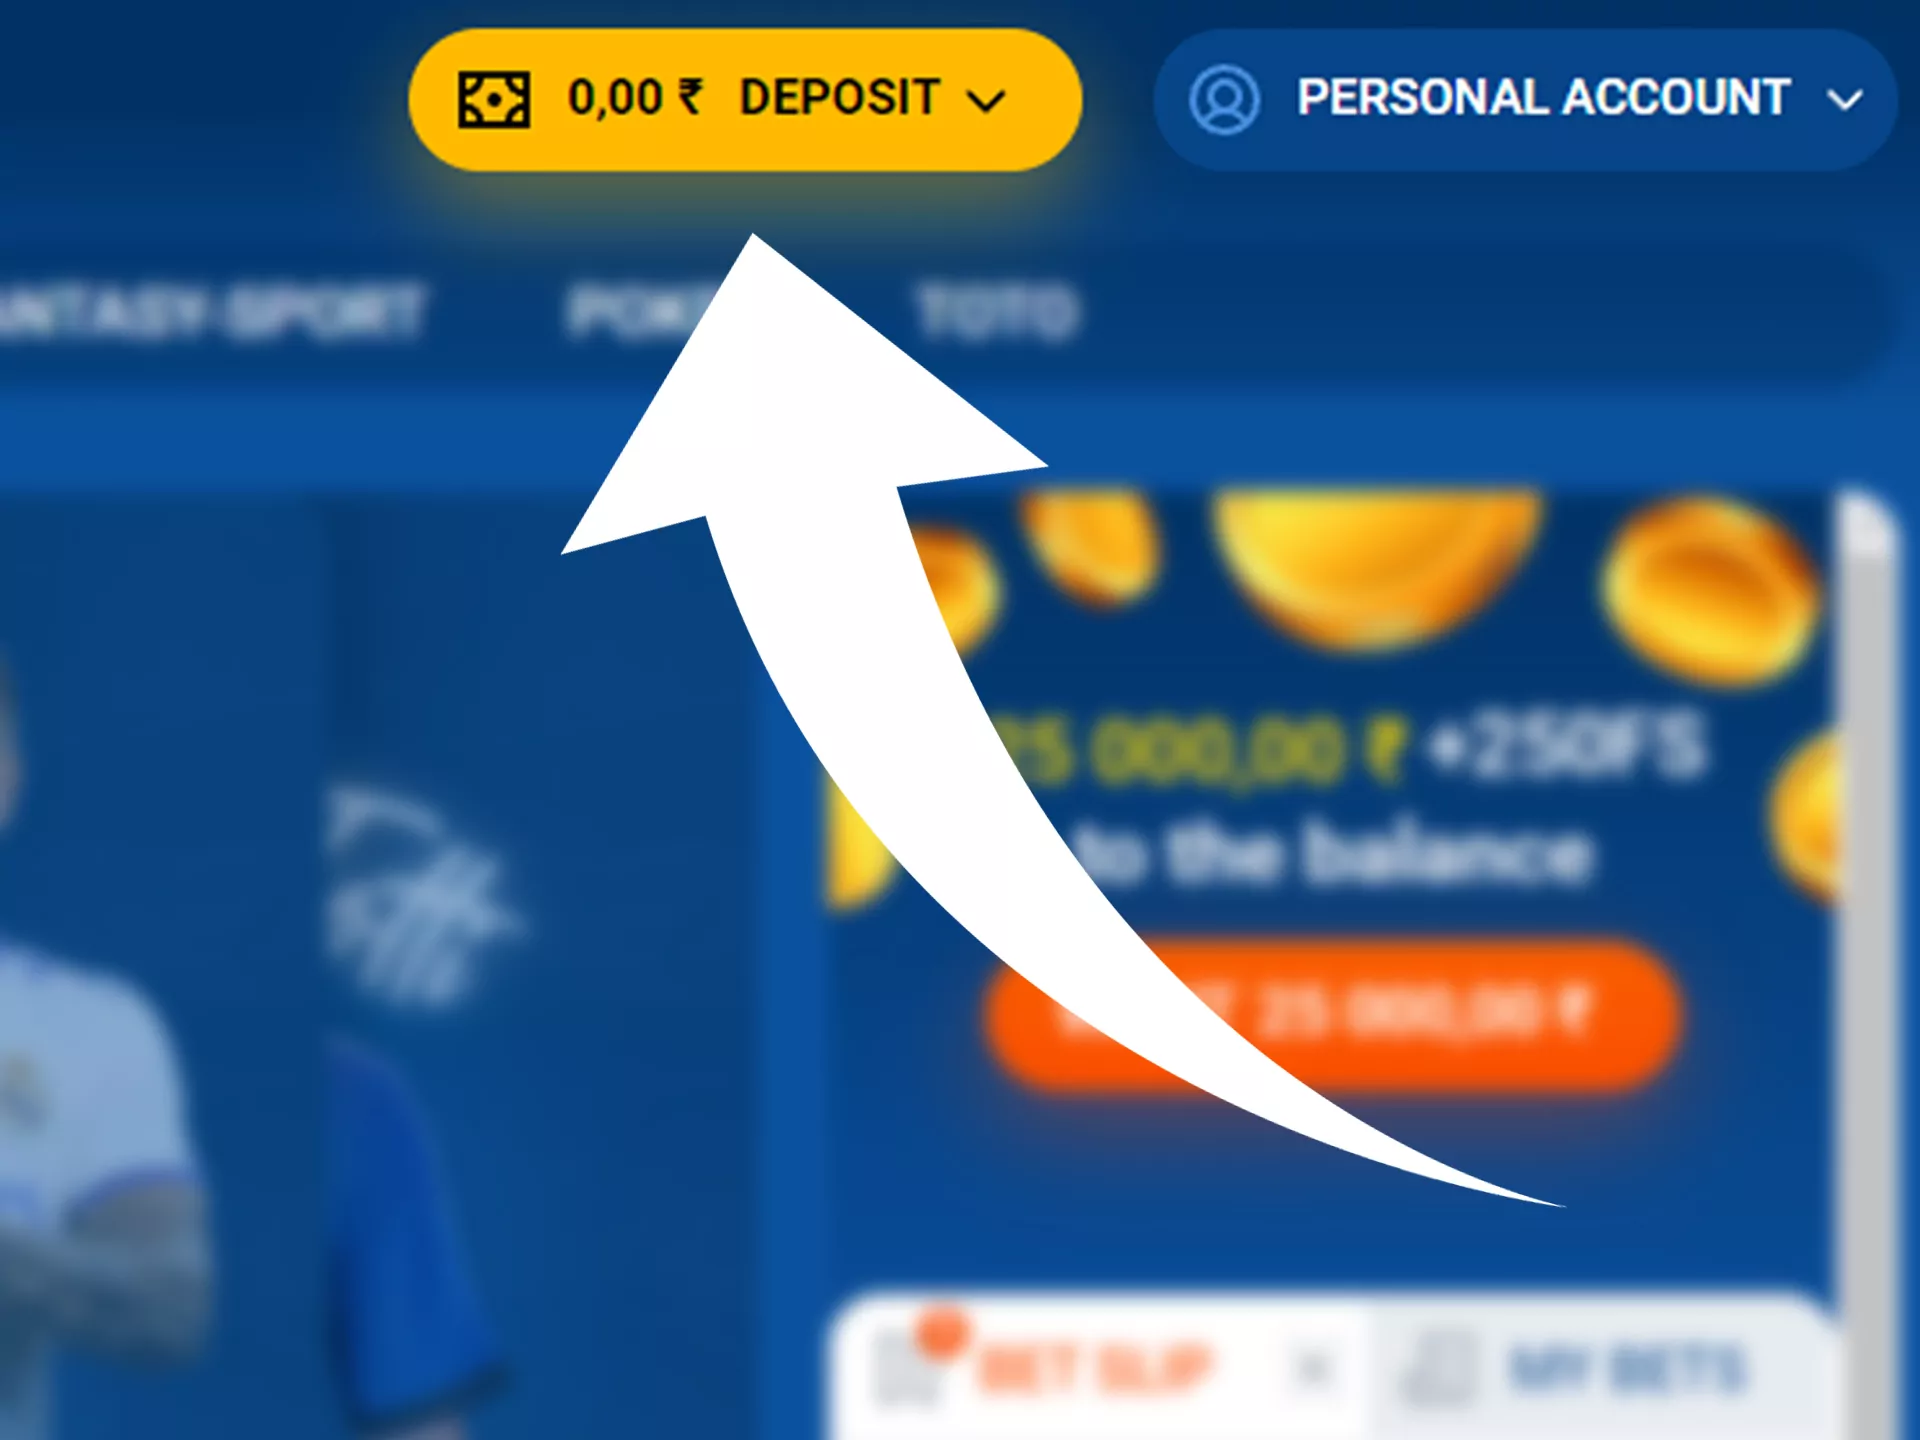 Make your first deposit to start betting.